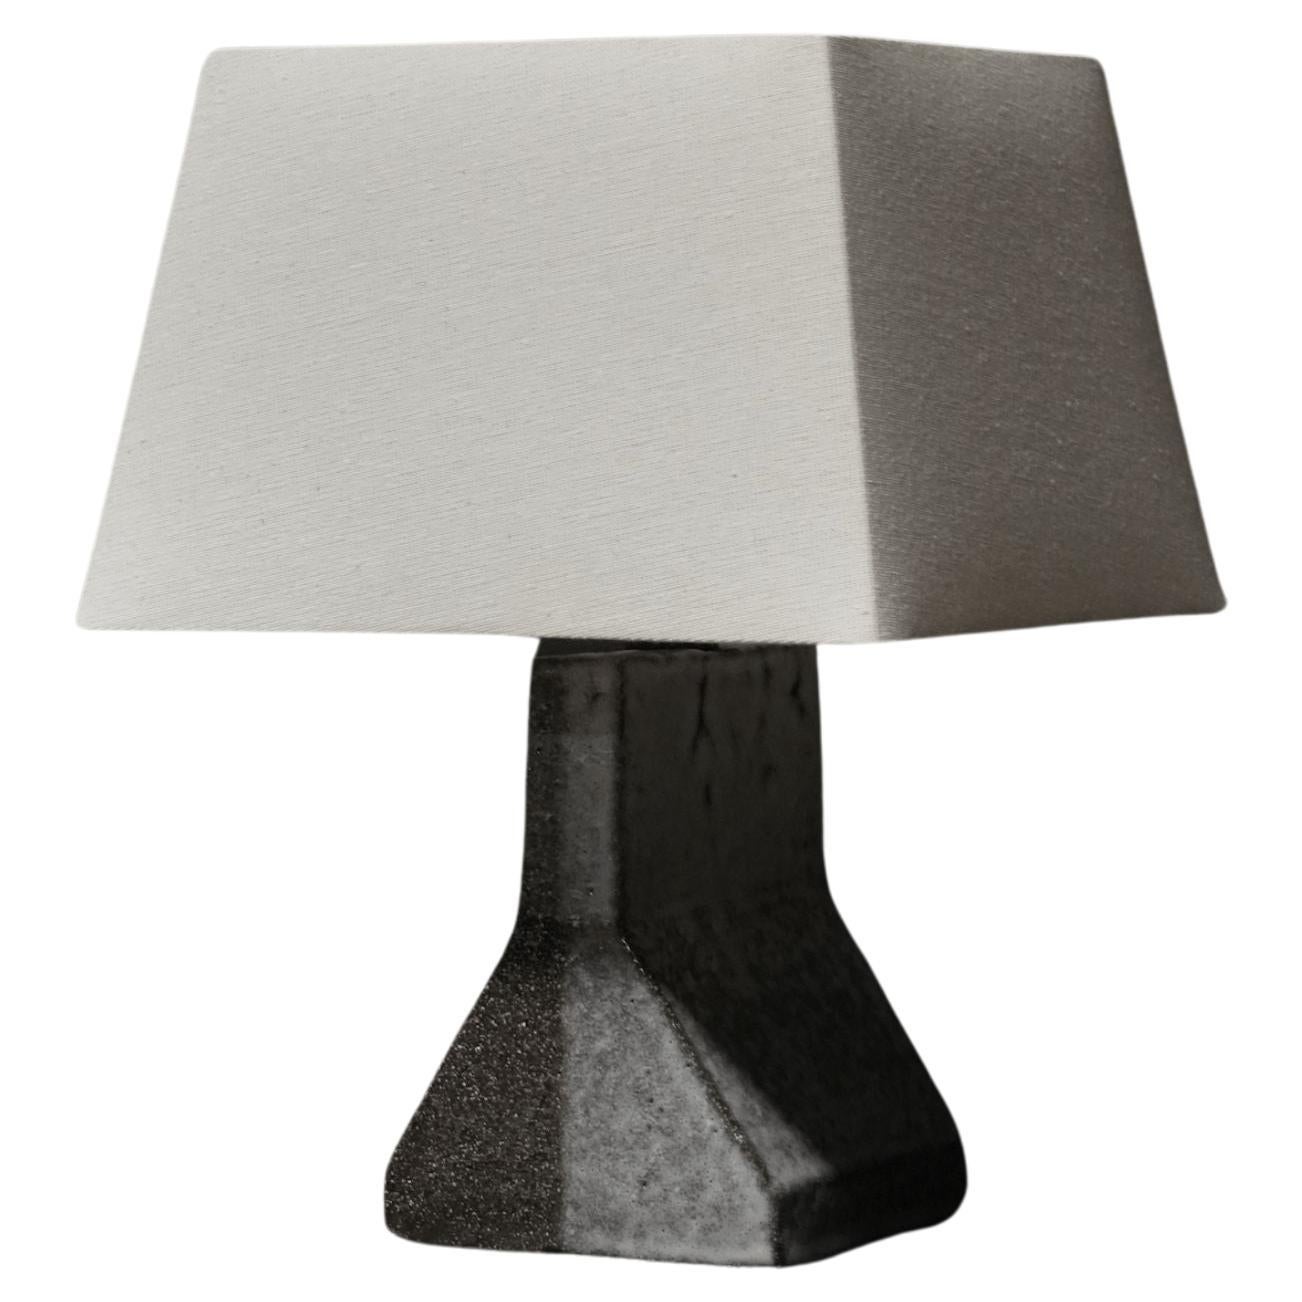 50/50 Ceramic Table Lamp For Sale